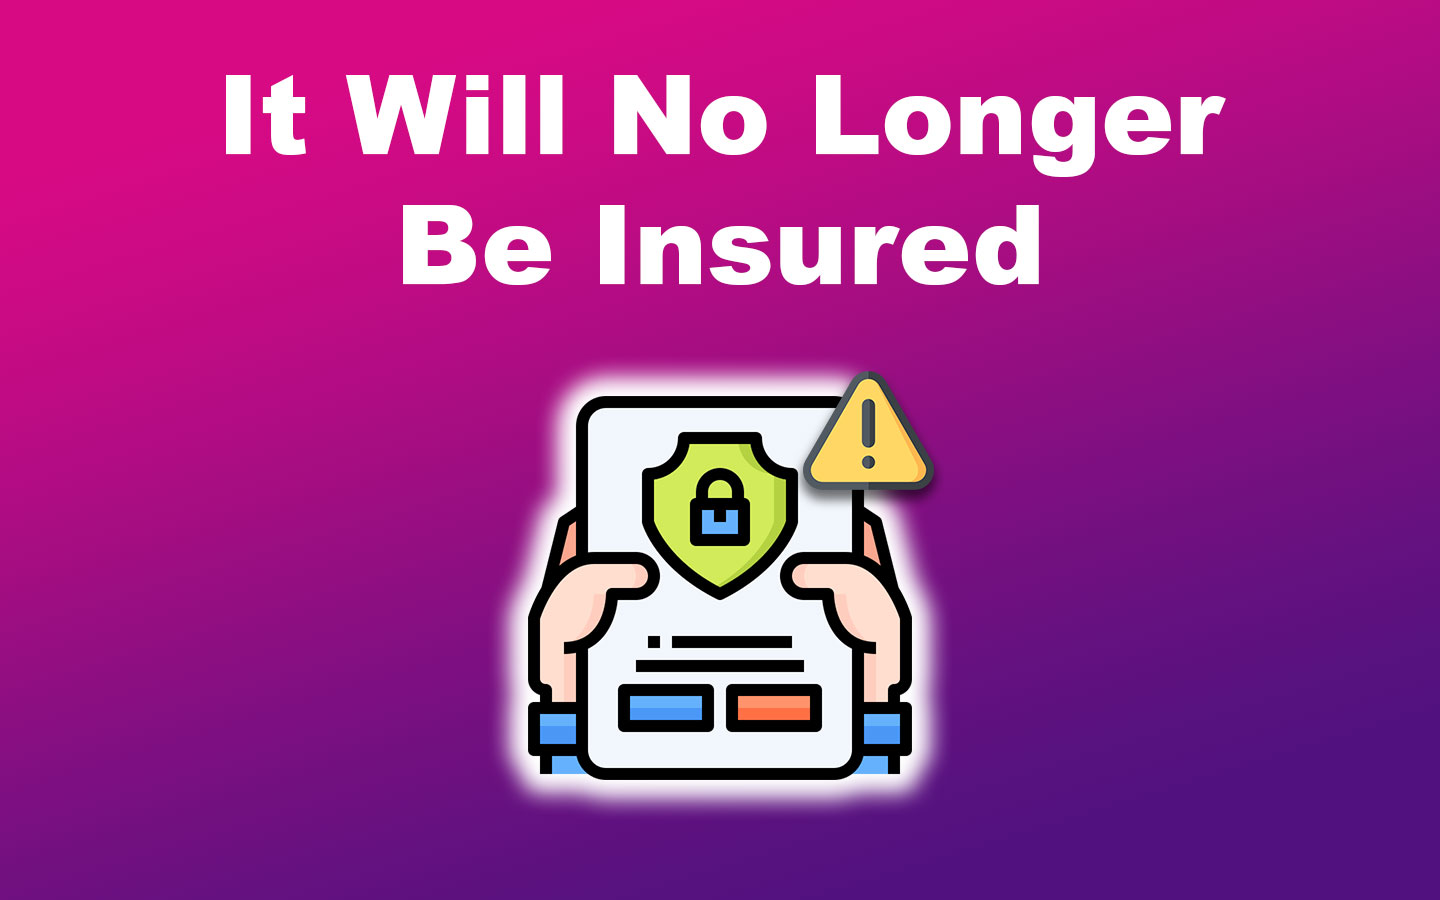 Cost to Unlock an iPhone No Longer Insured